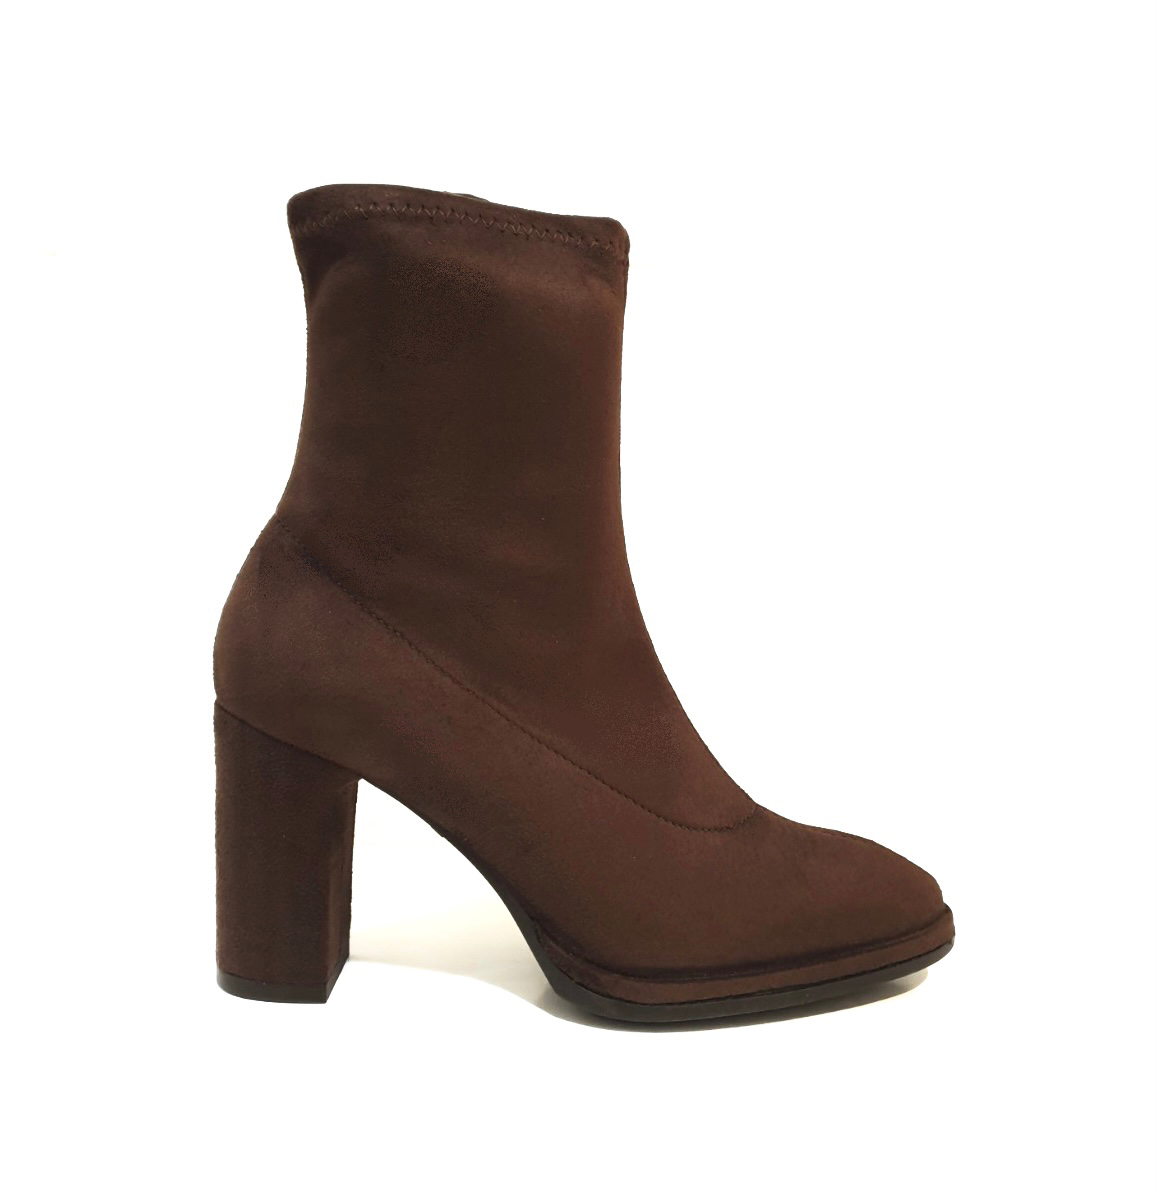 Wonders M-5104 Marron Brown Suede Leather Stretch Sarga Zip Ankle Boot Made In Spain